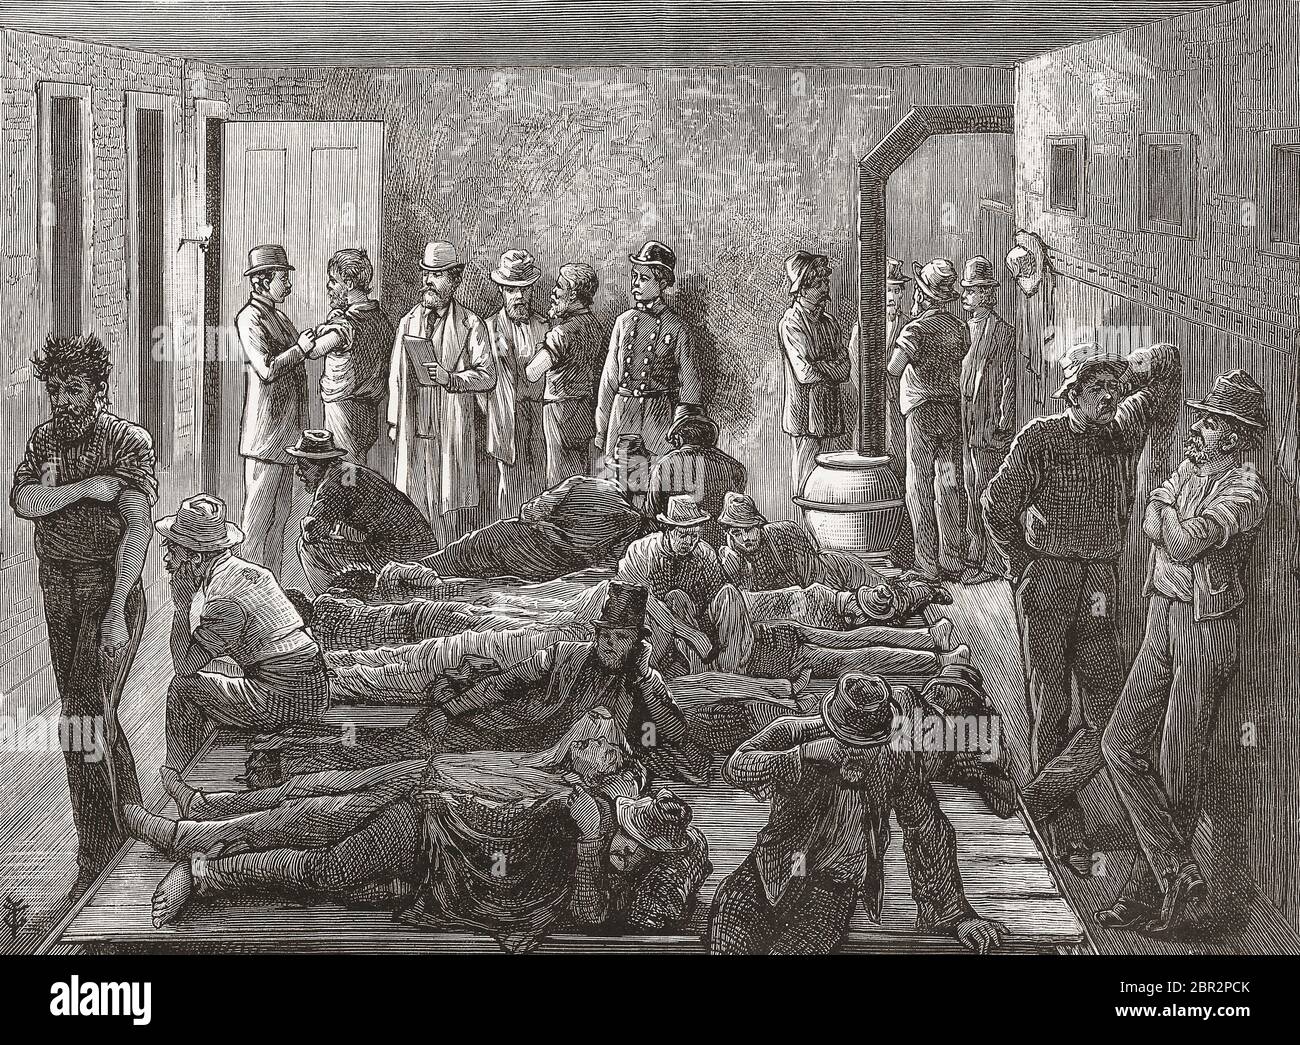 Isolation of homeless men during a smallpox epidemic in New York, USA in the late 19th century.  Outbreaks of contagious diseases in slum areas were common in New York and other major cities around the world.  After an illustration in an 1879 edition of Frank Leslie’s Illustrated Newspaper. Stock Photo